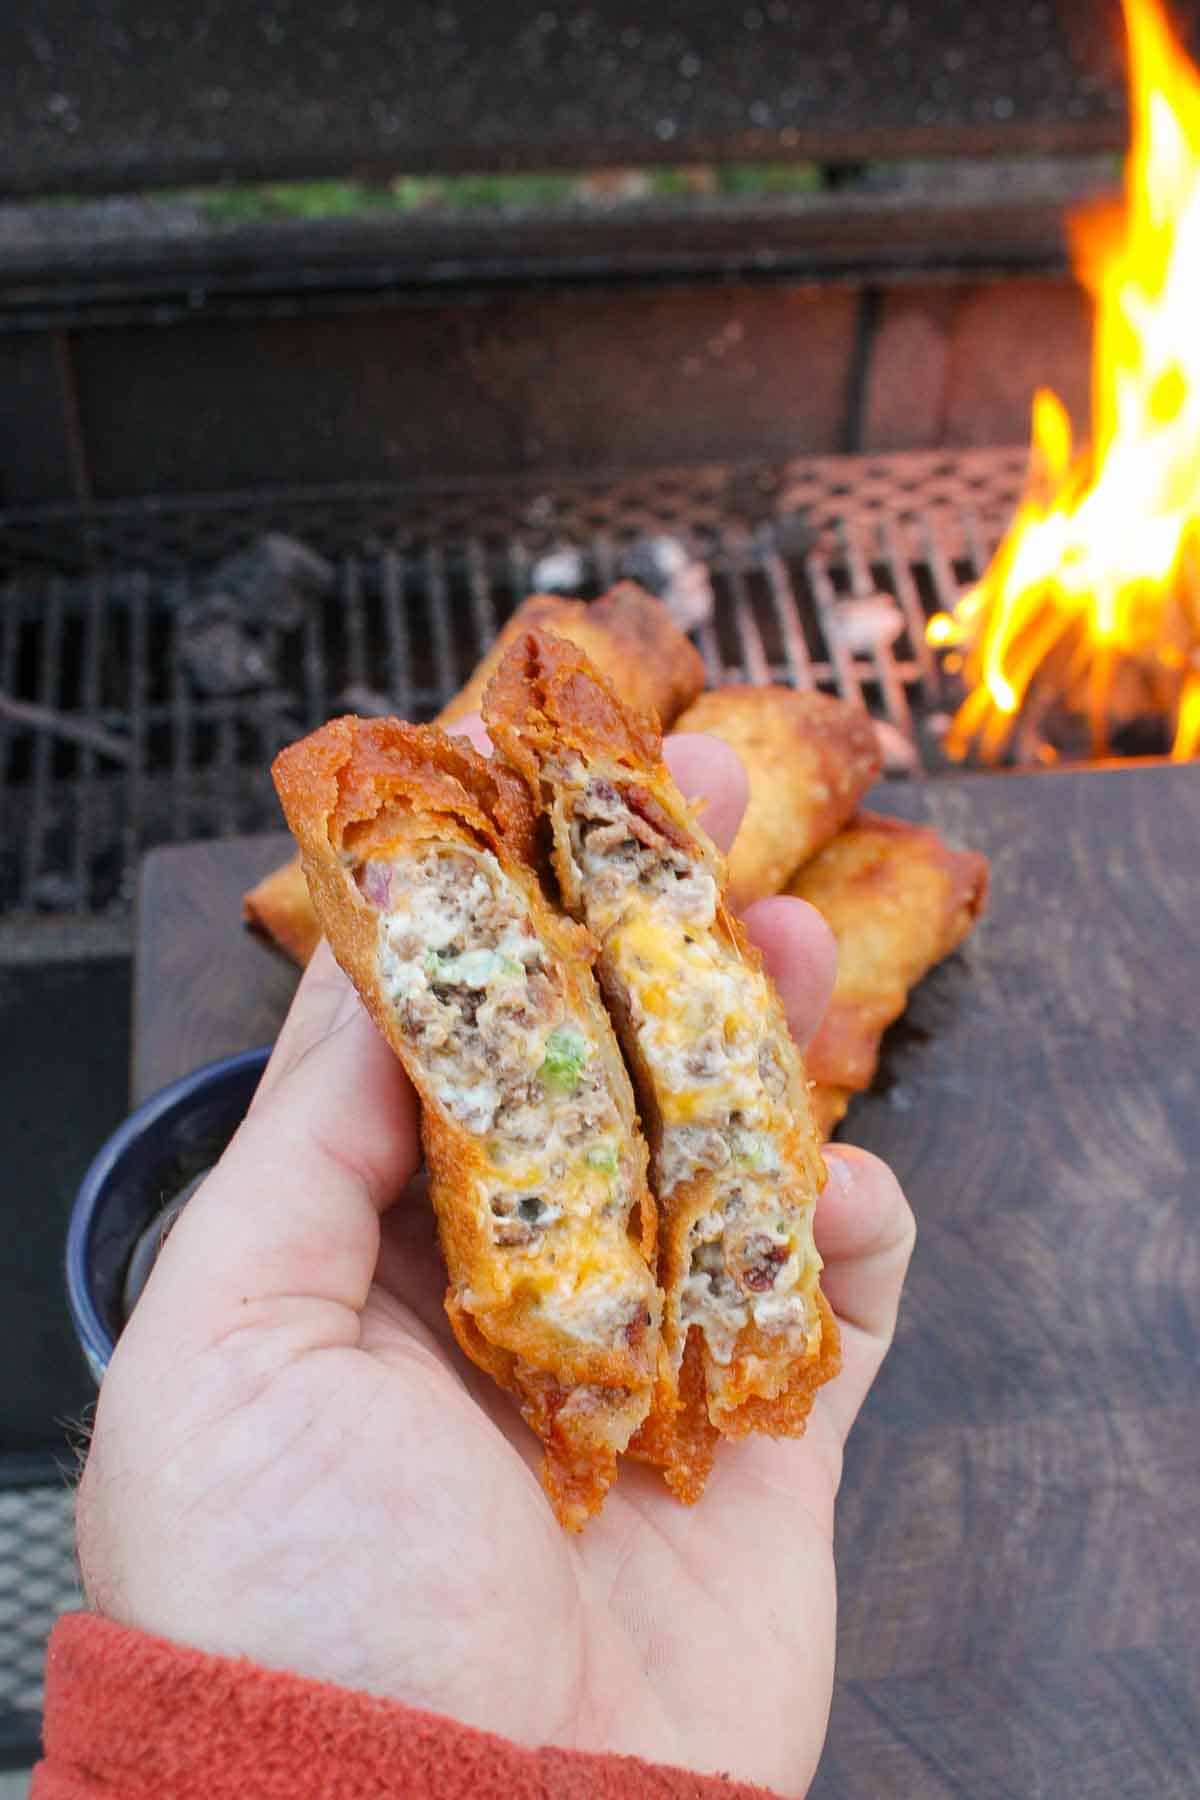 The jalapeno popper egg rolls are sliced and ready to devour.